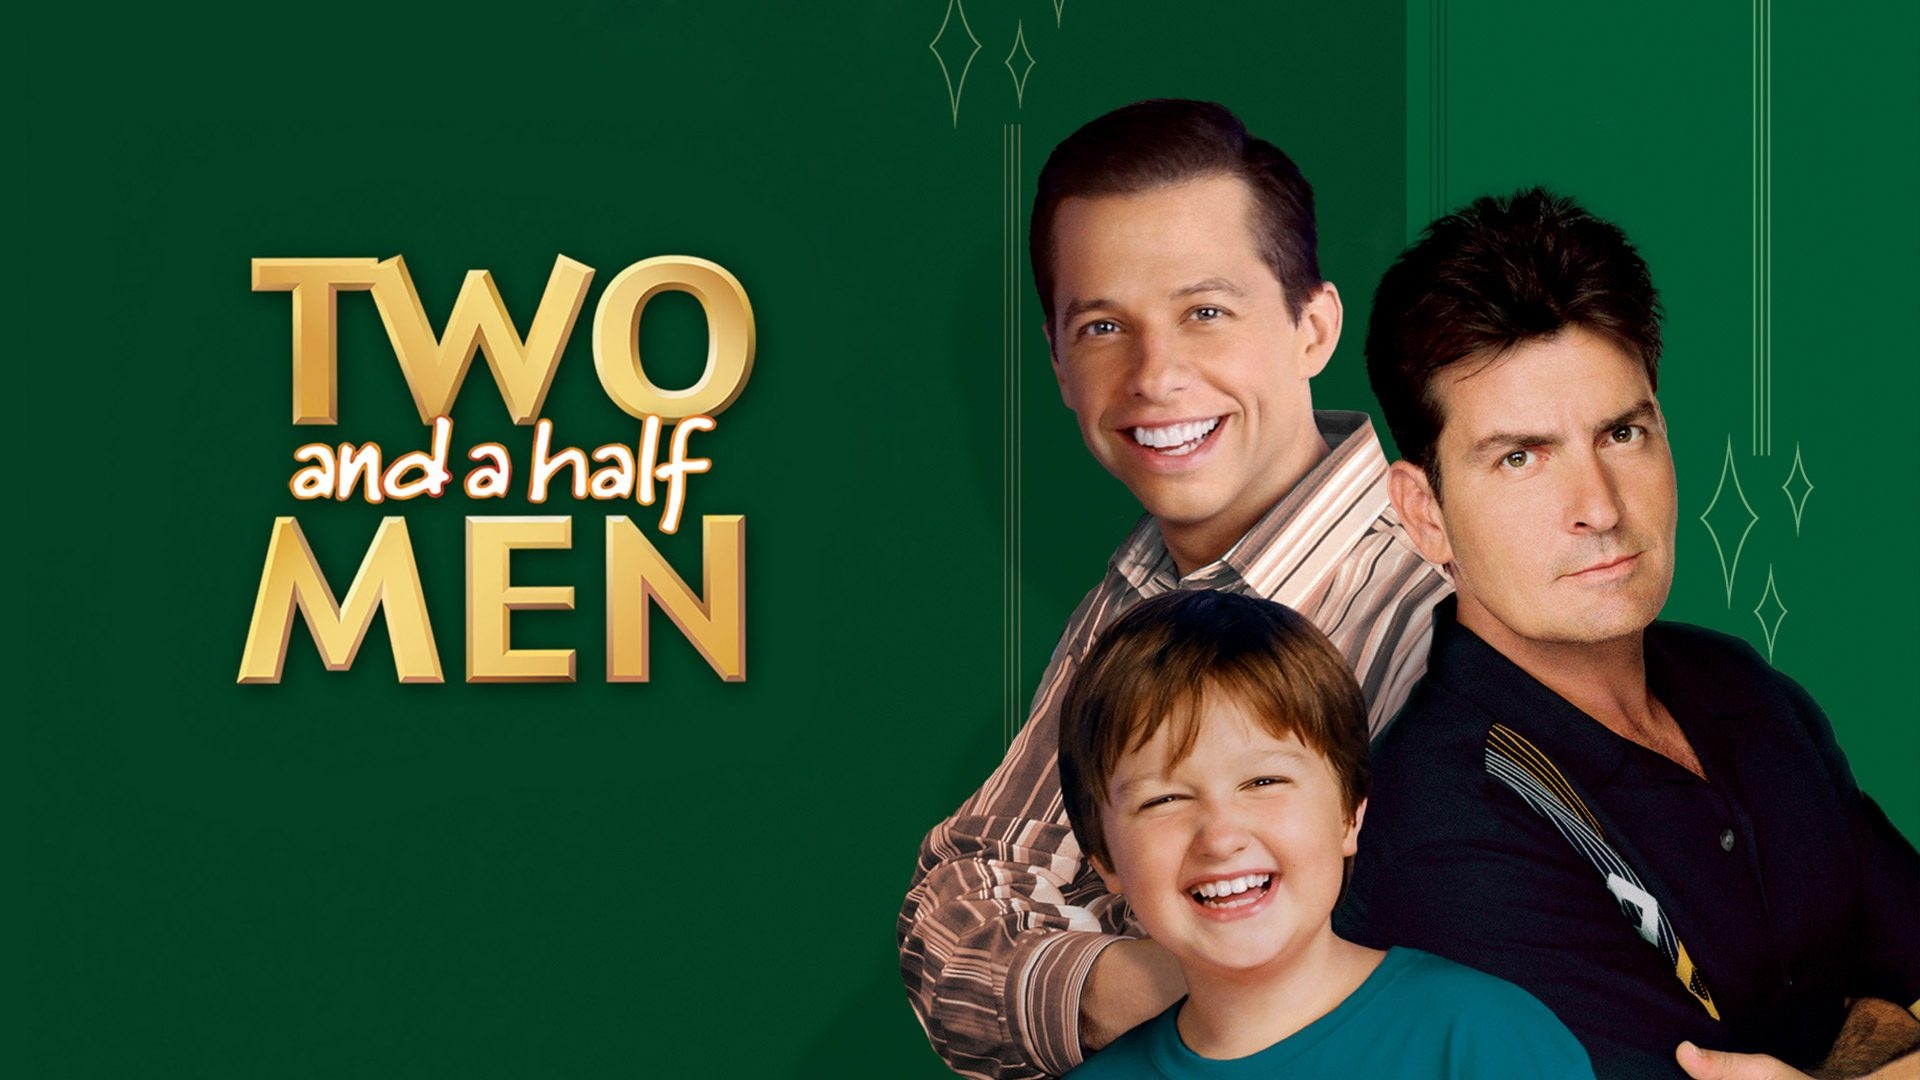 Two and a Half Men (TV Series) Wallpapers (42+ images inside)